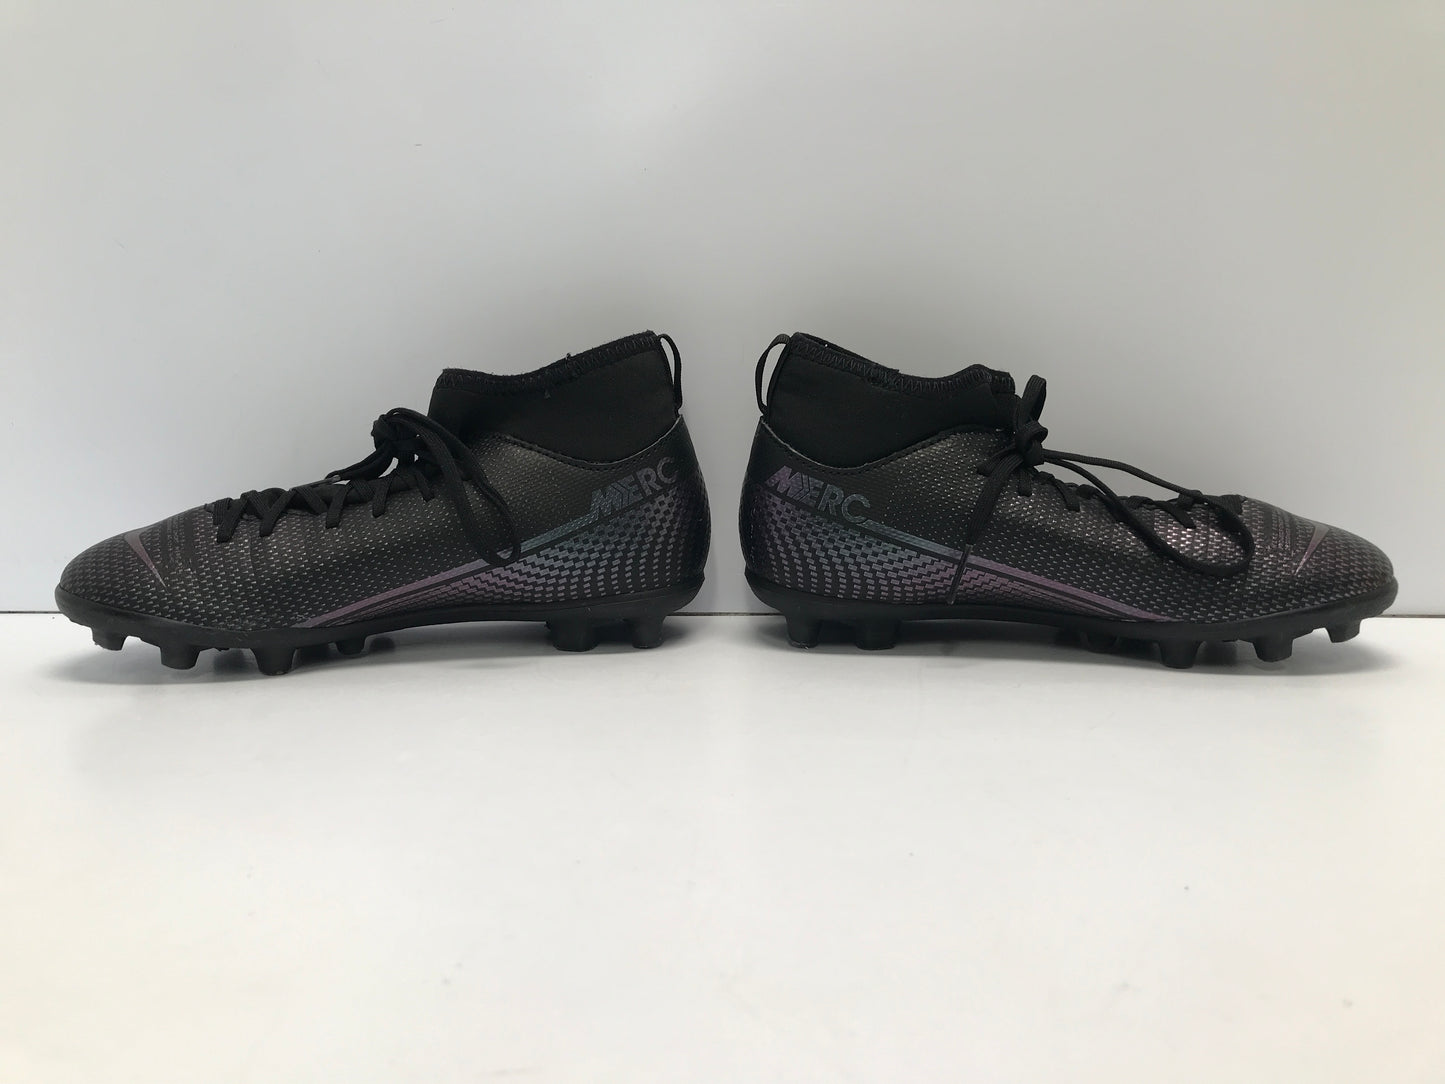 Soccer Shoes Cleats Child Size 2 Nike Zoom Slipper Foots Black Grey Excellent